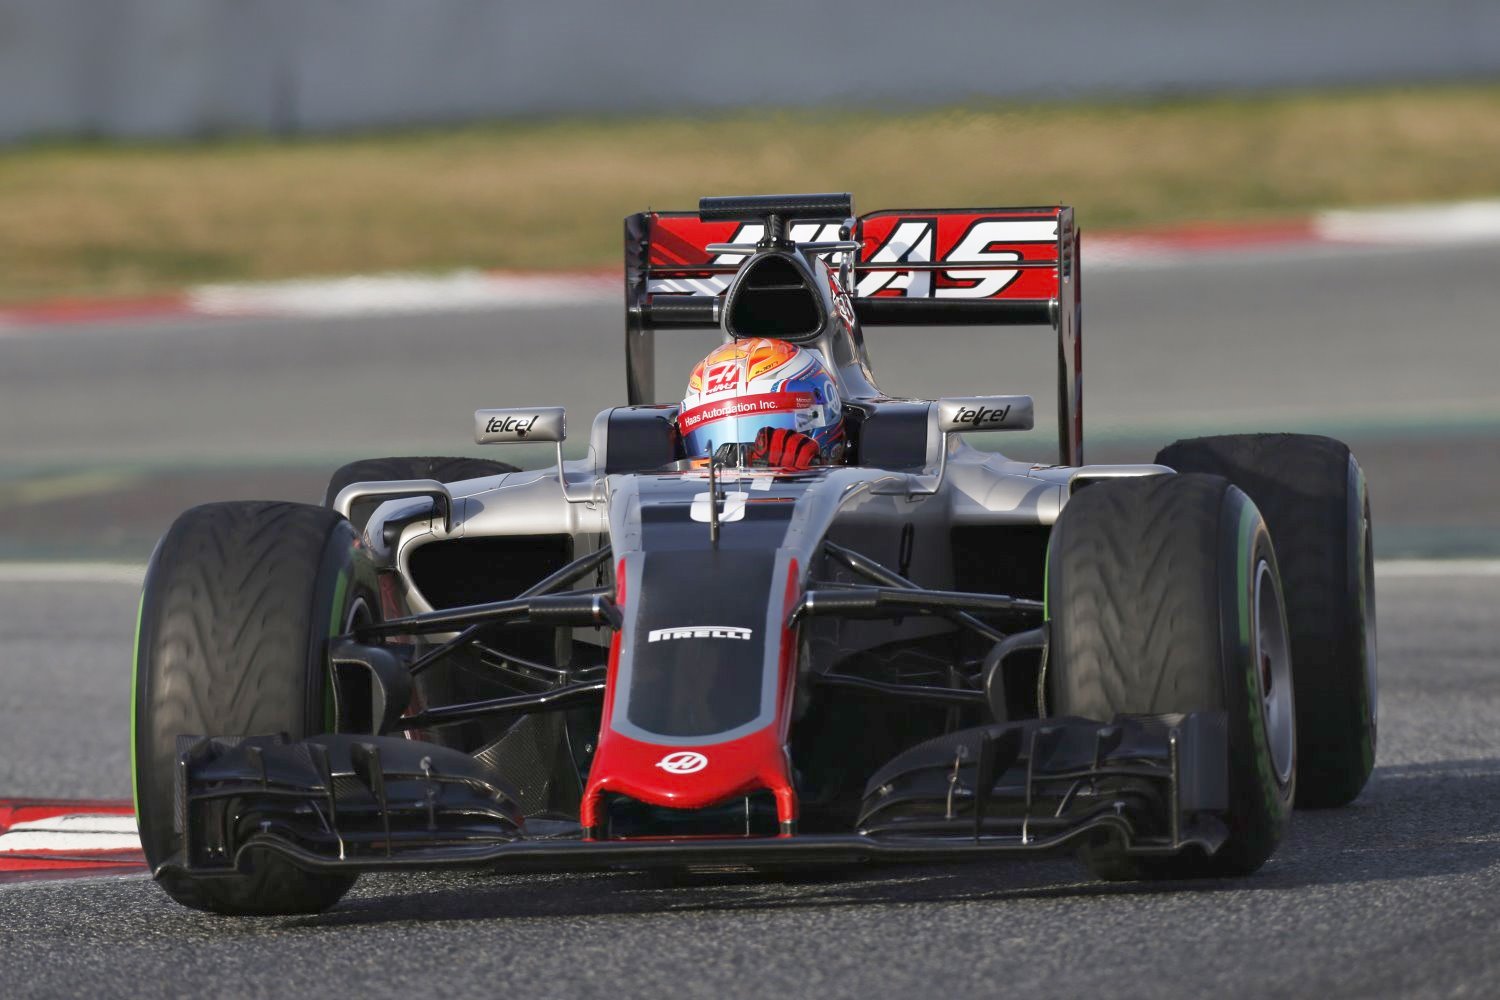 Can Haas keep pace with development?